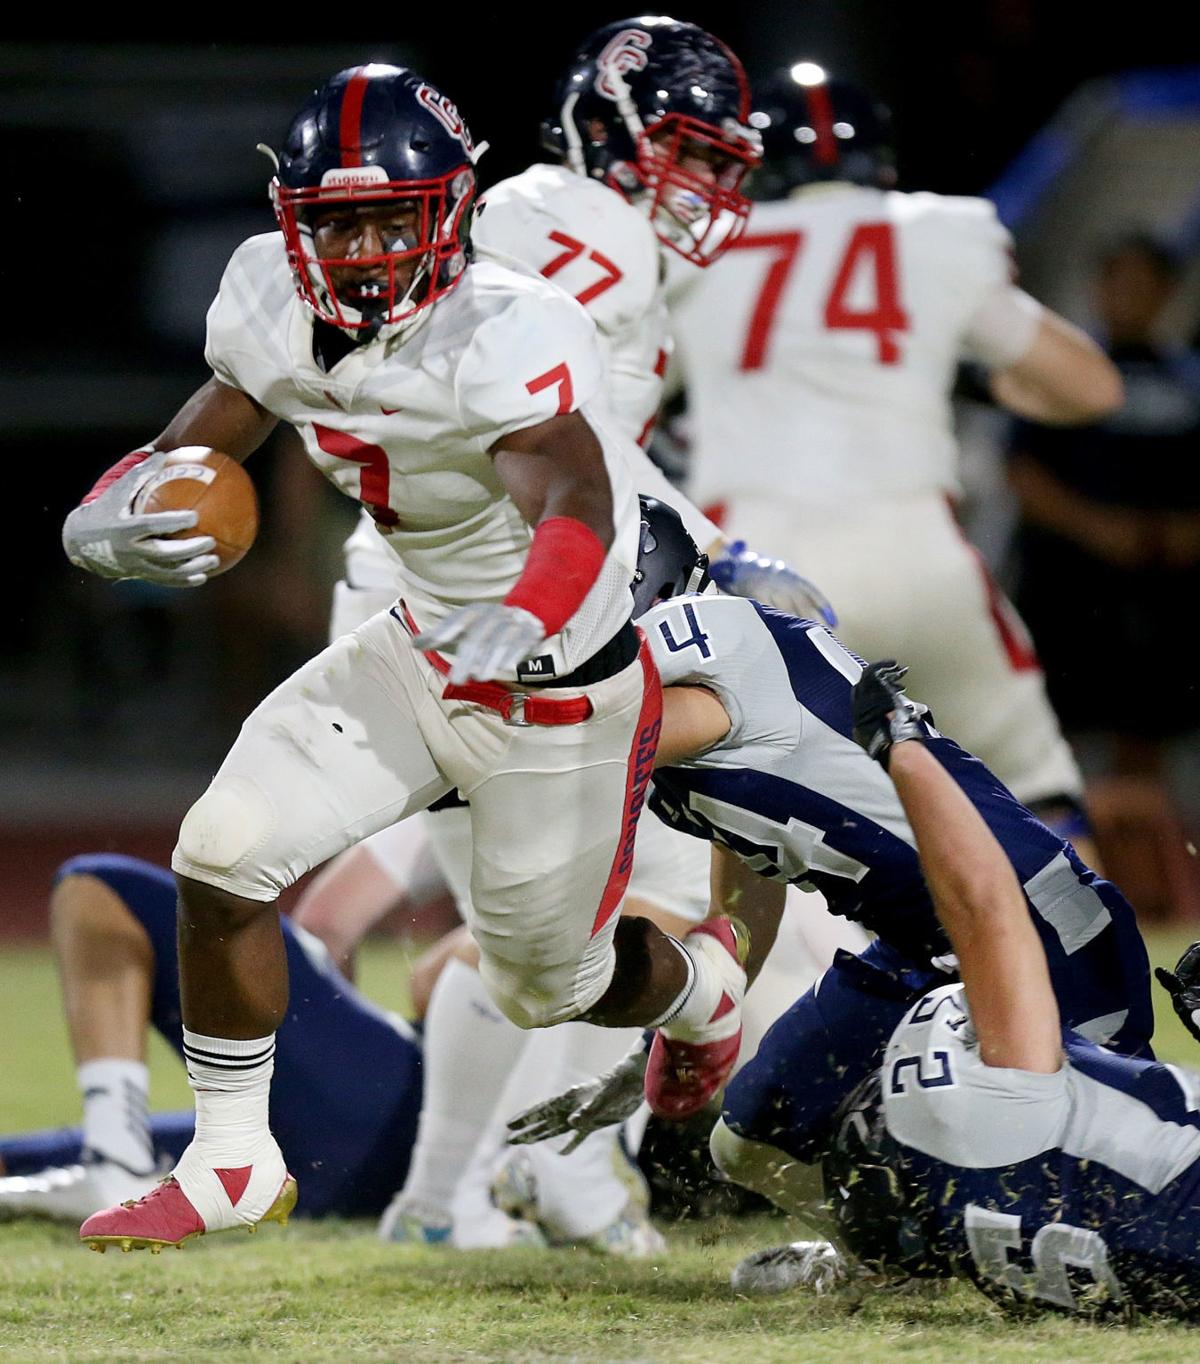 Peoria Centennial earns some revenge with 55-7 rout of Ironwood Ridge